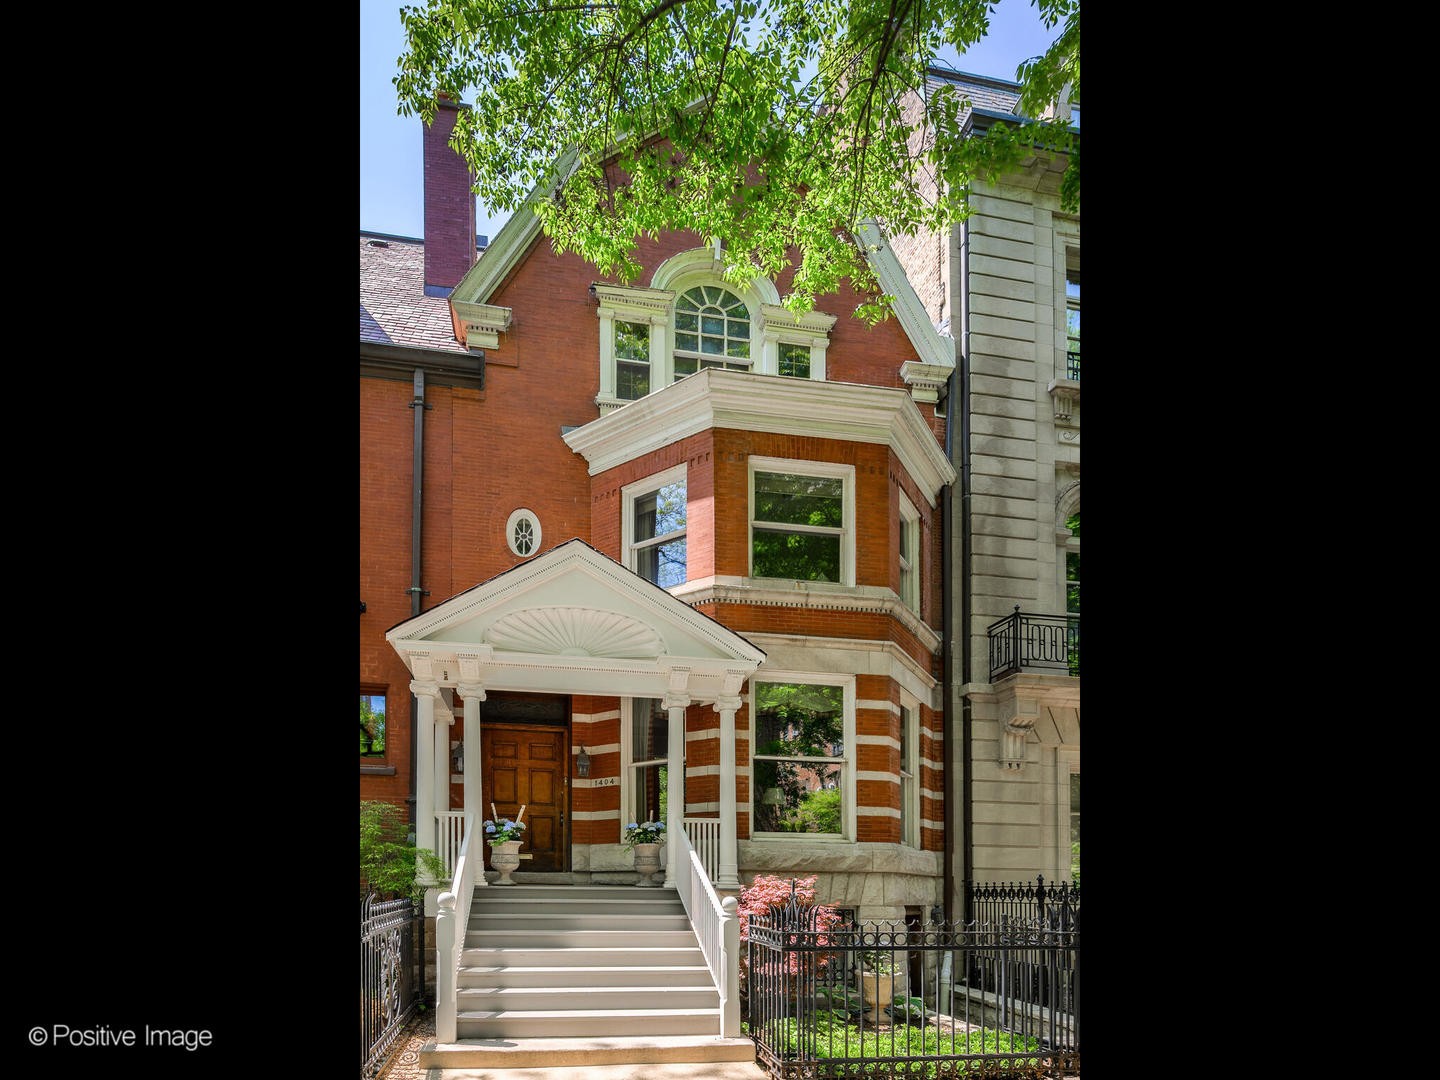 1404 N Astor Street : a Luxury Single Family Home for Sale - Near North Side Chicago, Illinois